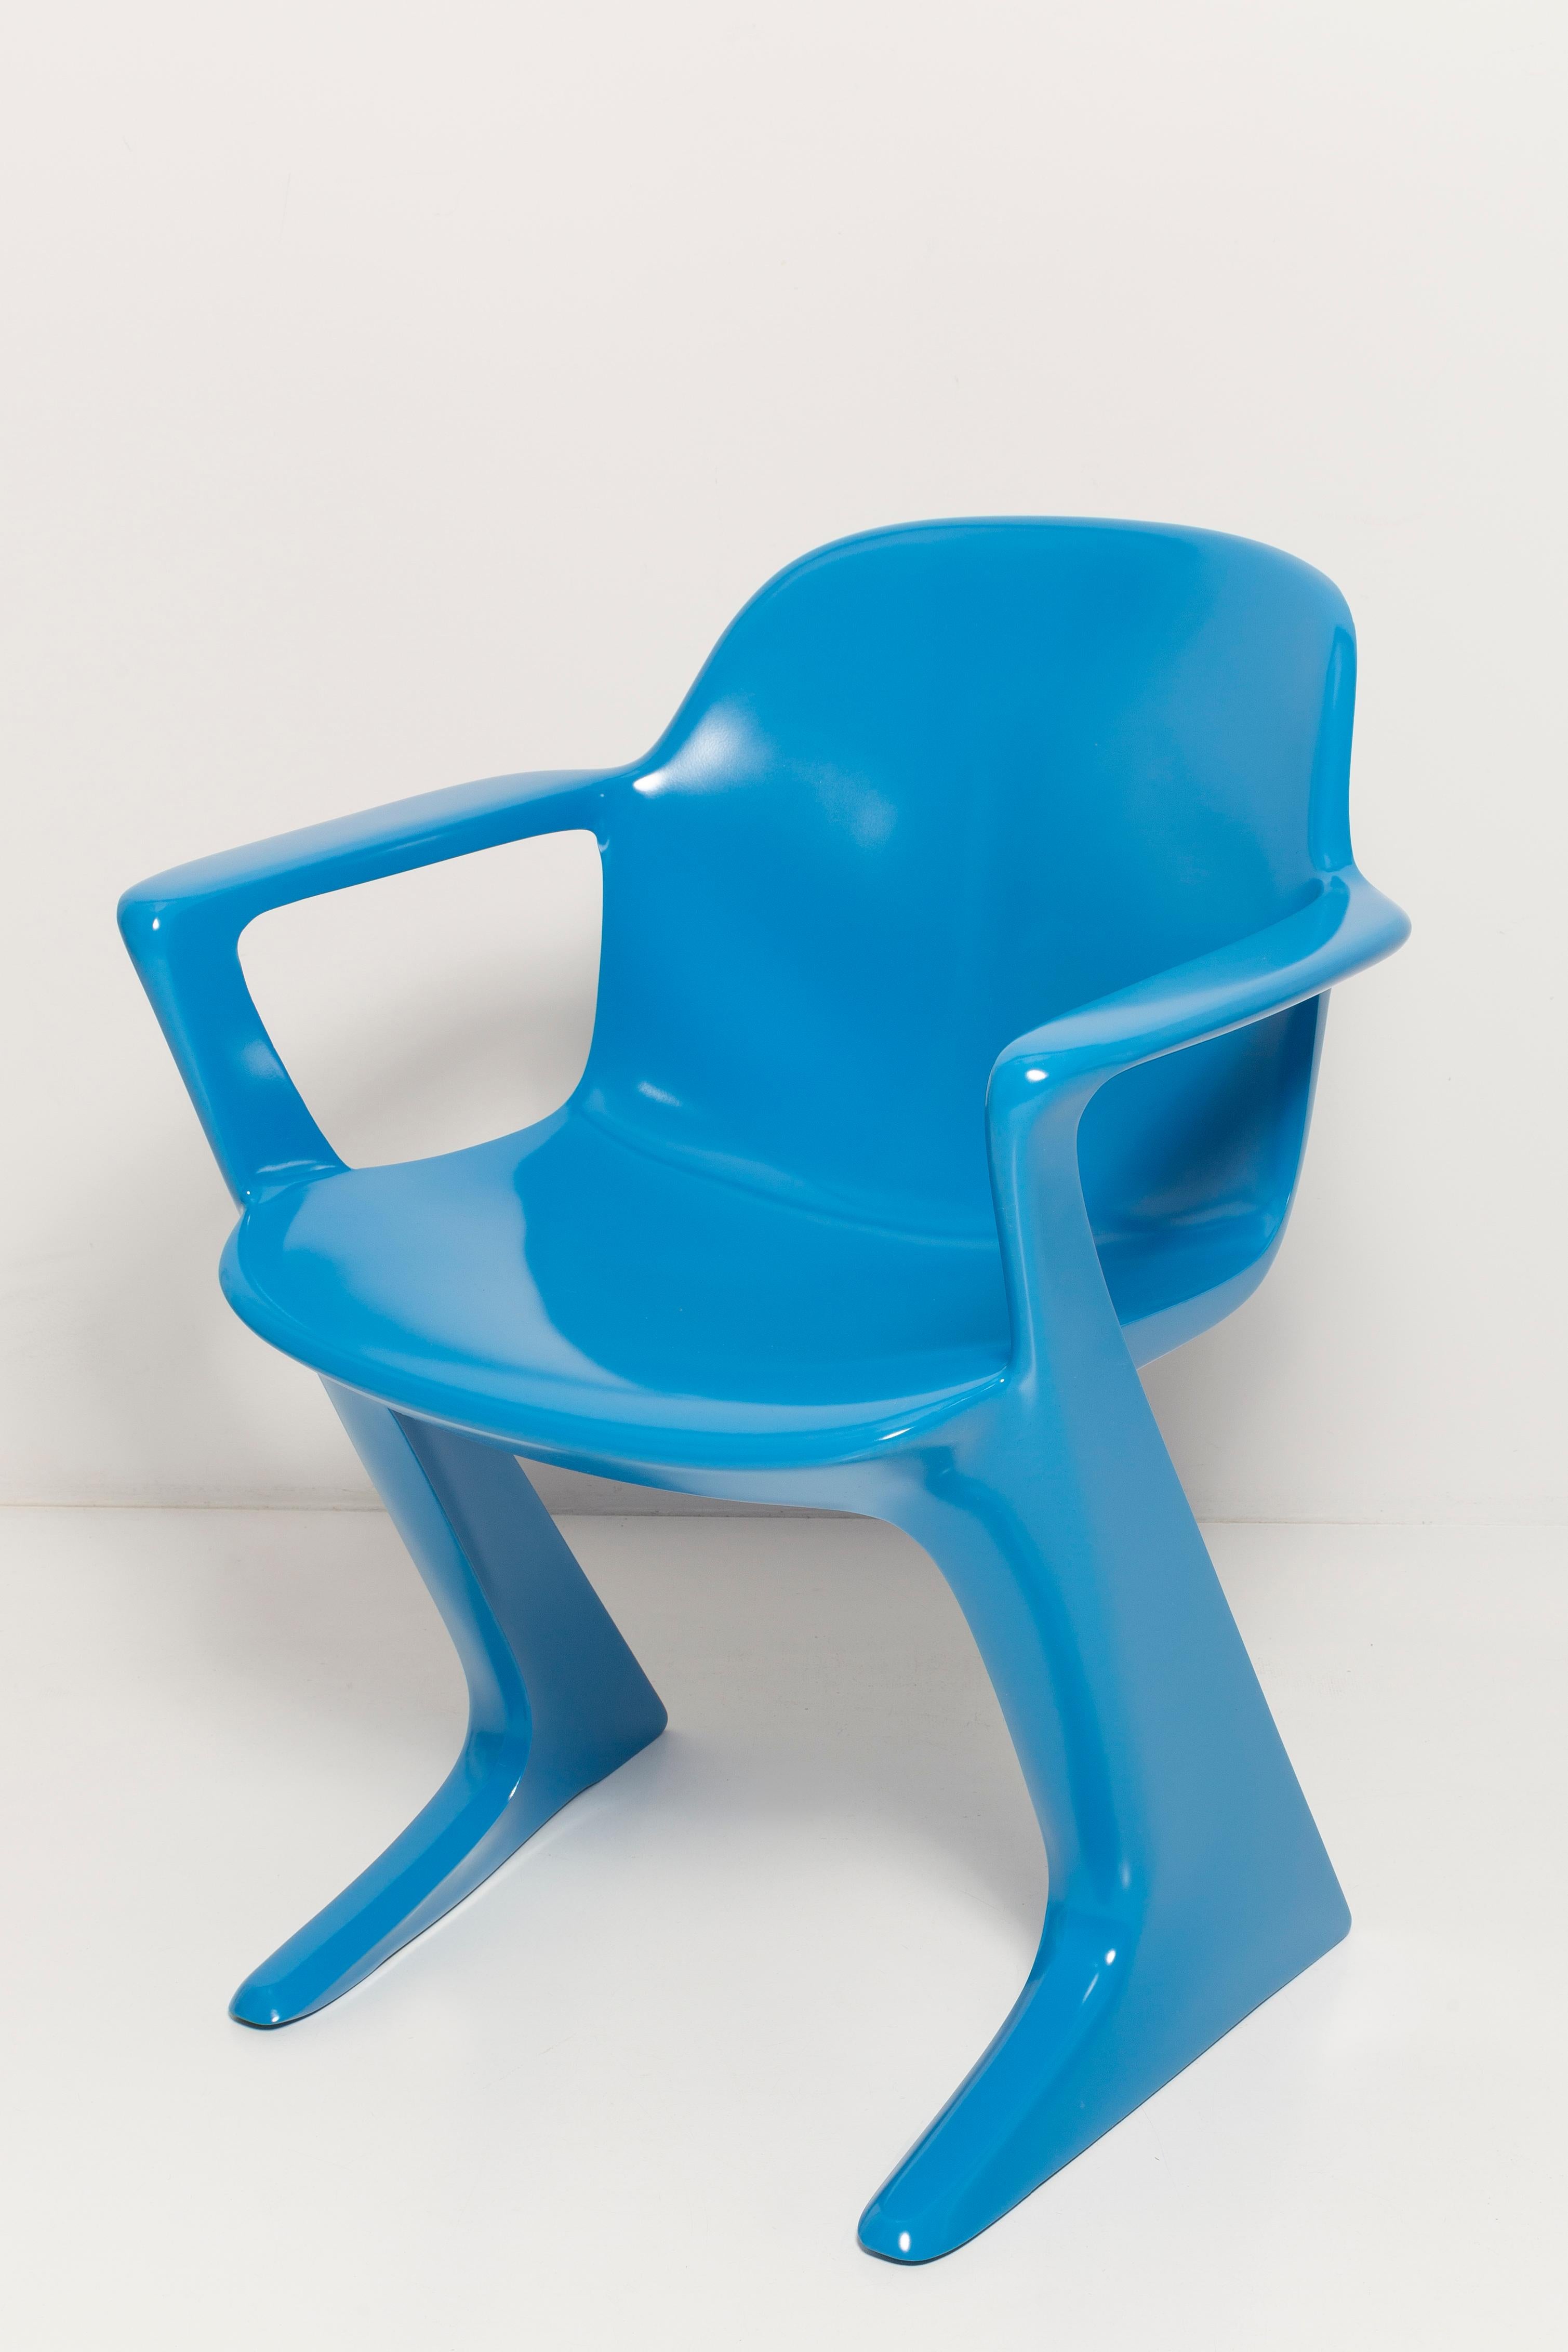 Fiberglass Set of Six Blue Kangaroo Chairs Designed by Ernst Moeckl, Germany, 1960s For Sale